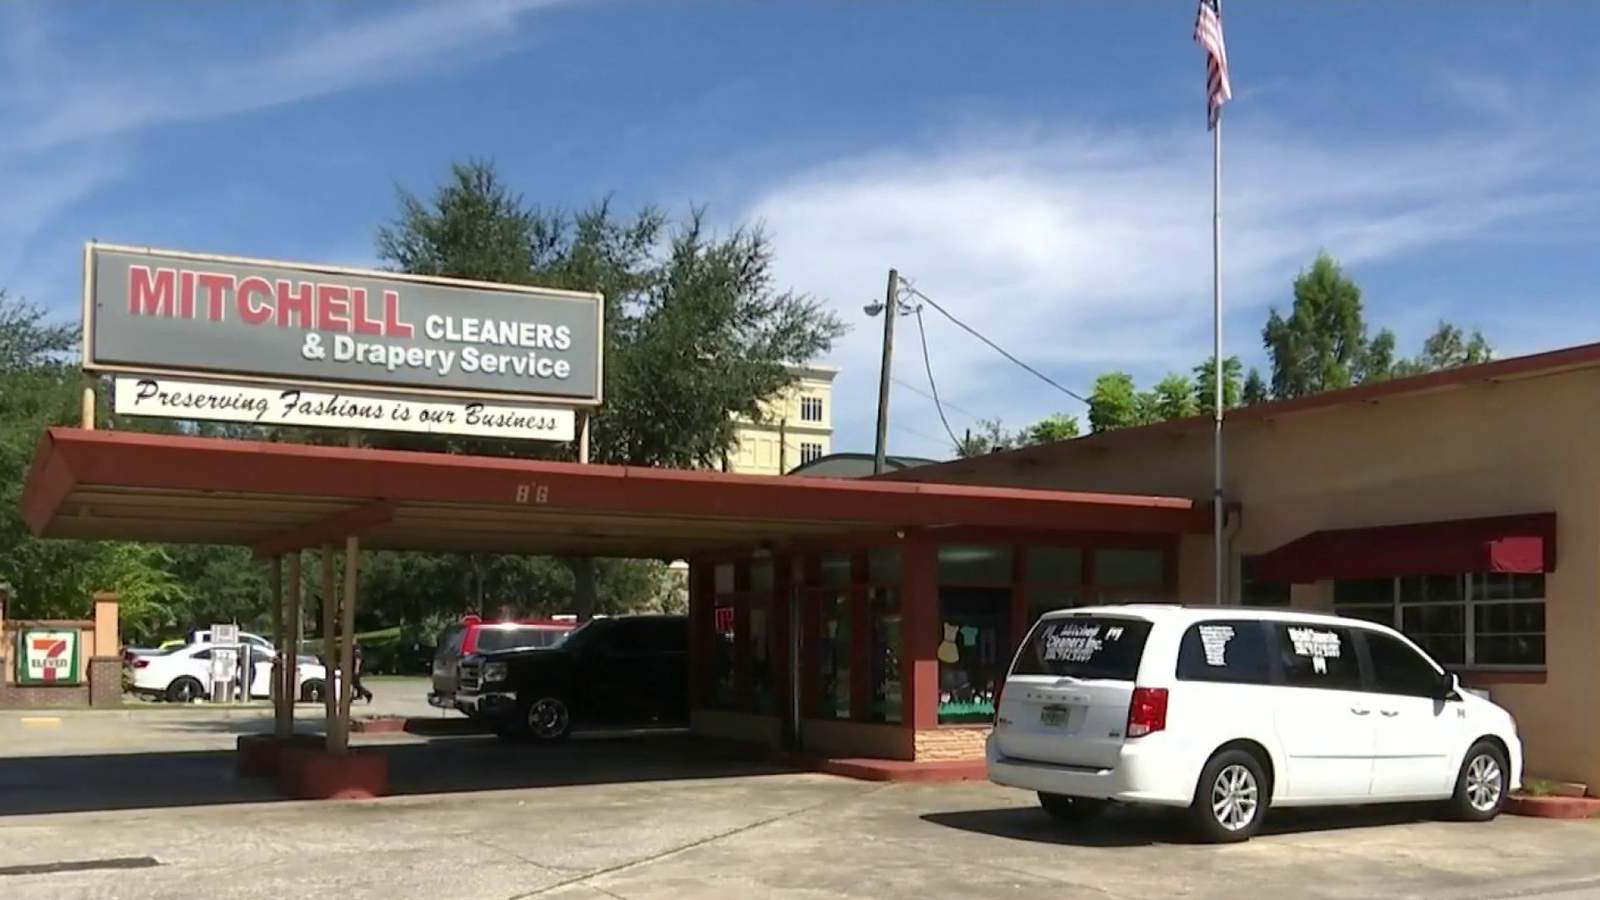 Dry cleaner offers free cleaning to those with job interview